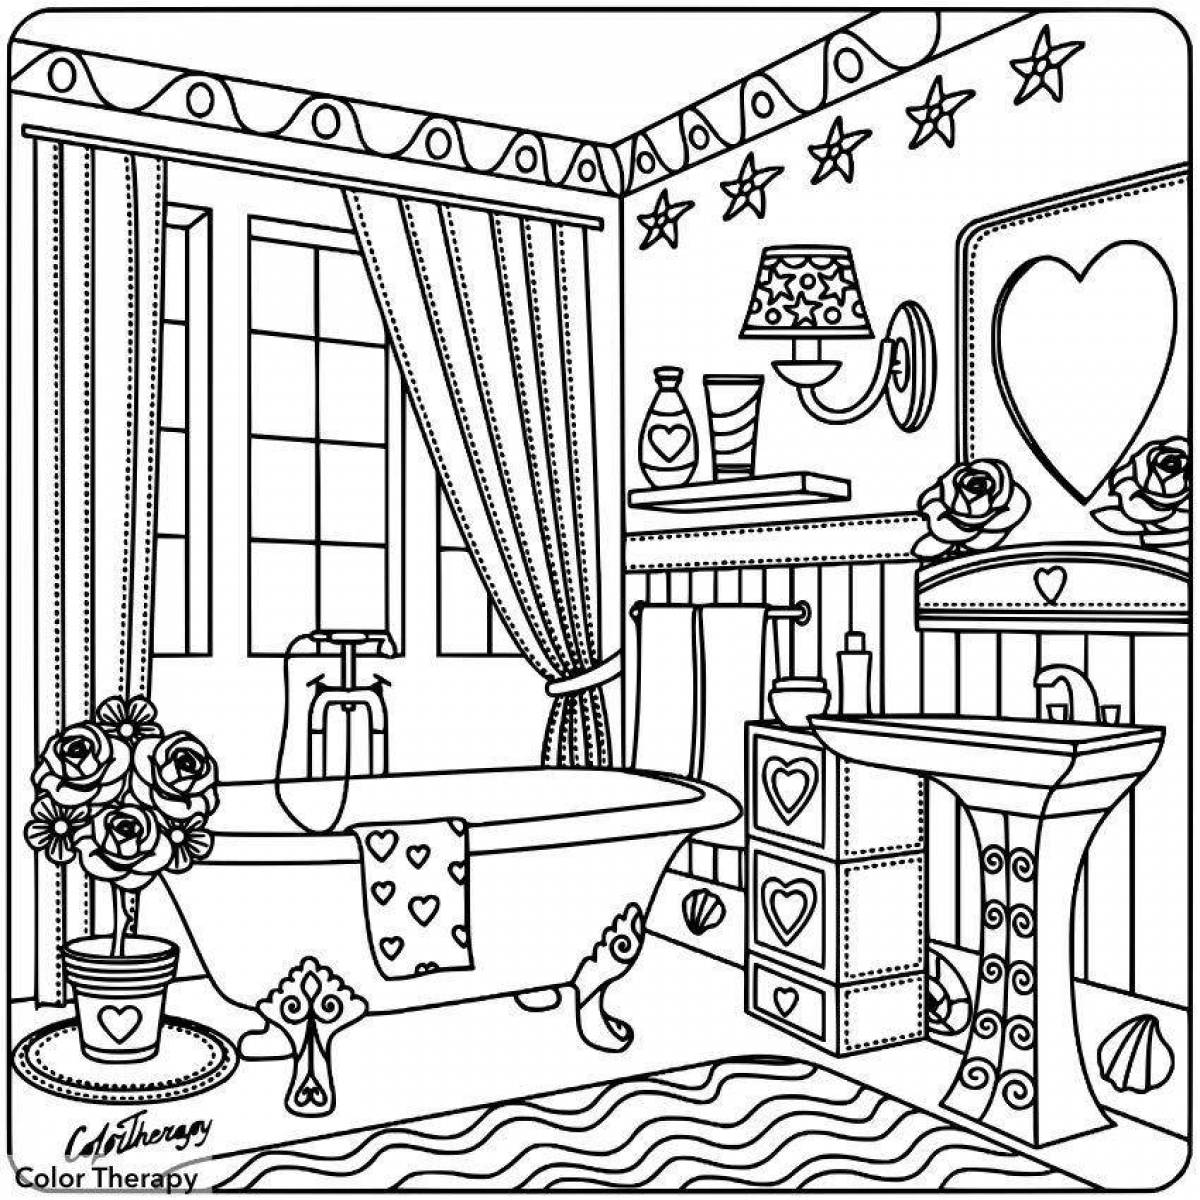 Intricate interior coloring page